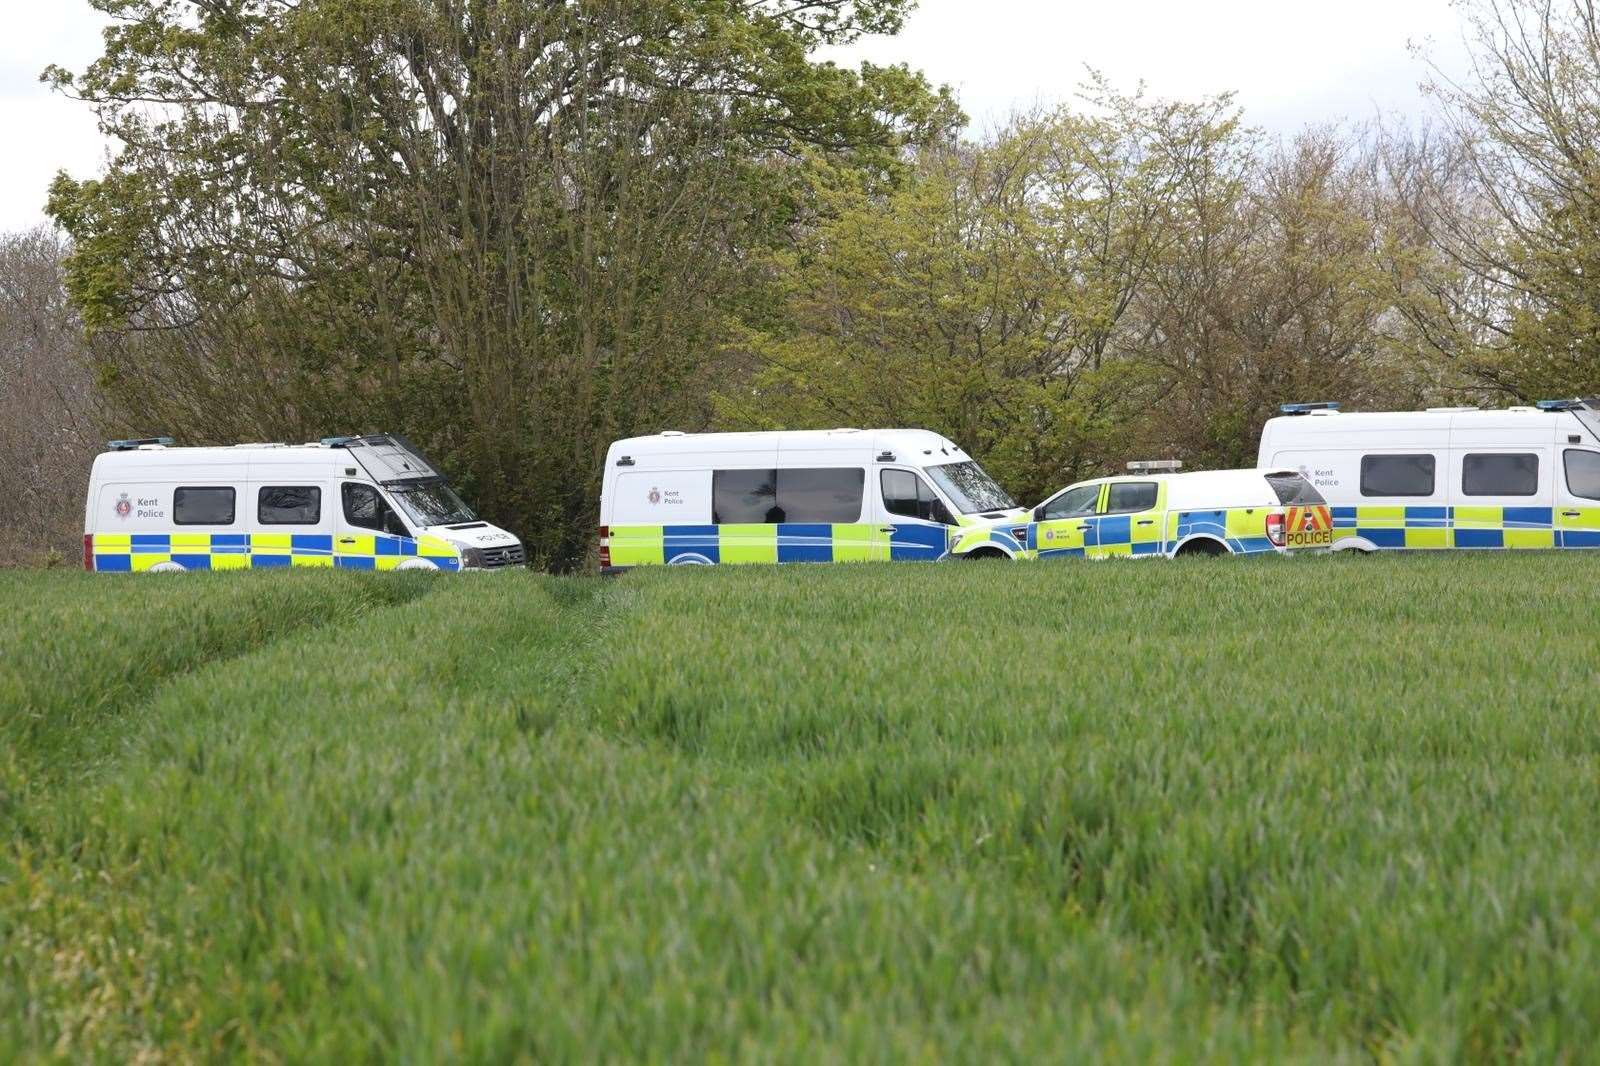 Police are searching a field in Womenswold as their hunt for PCSO Julia James' killer continues. Picture: UKNIP